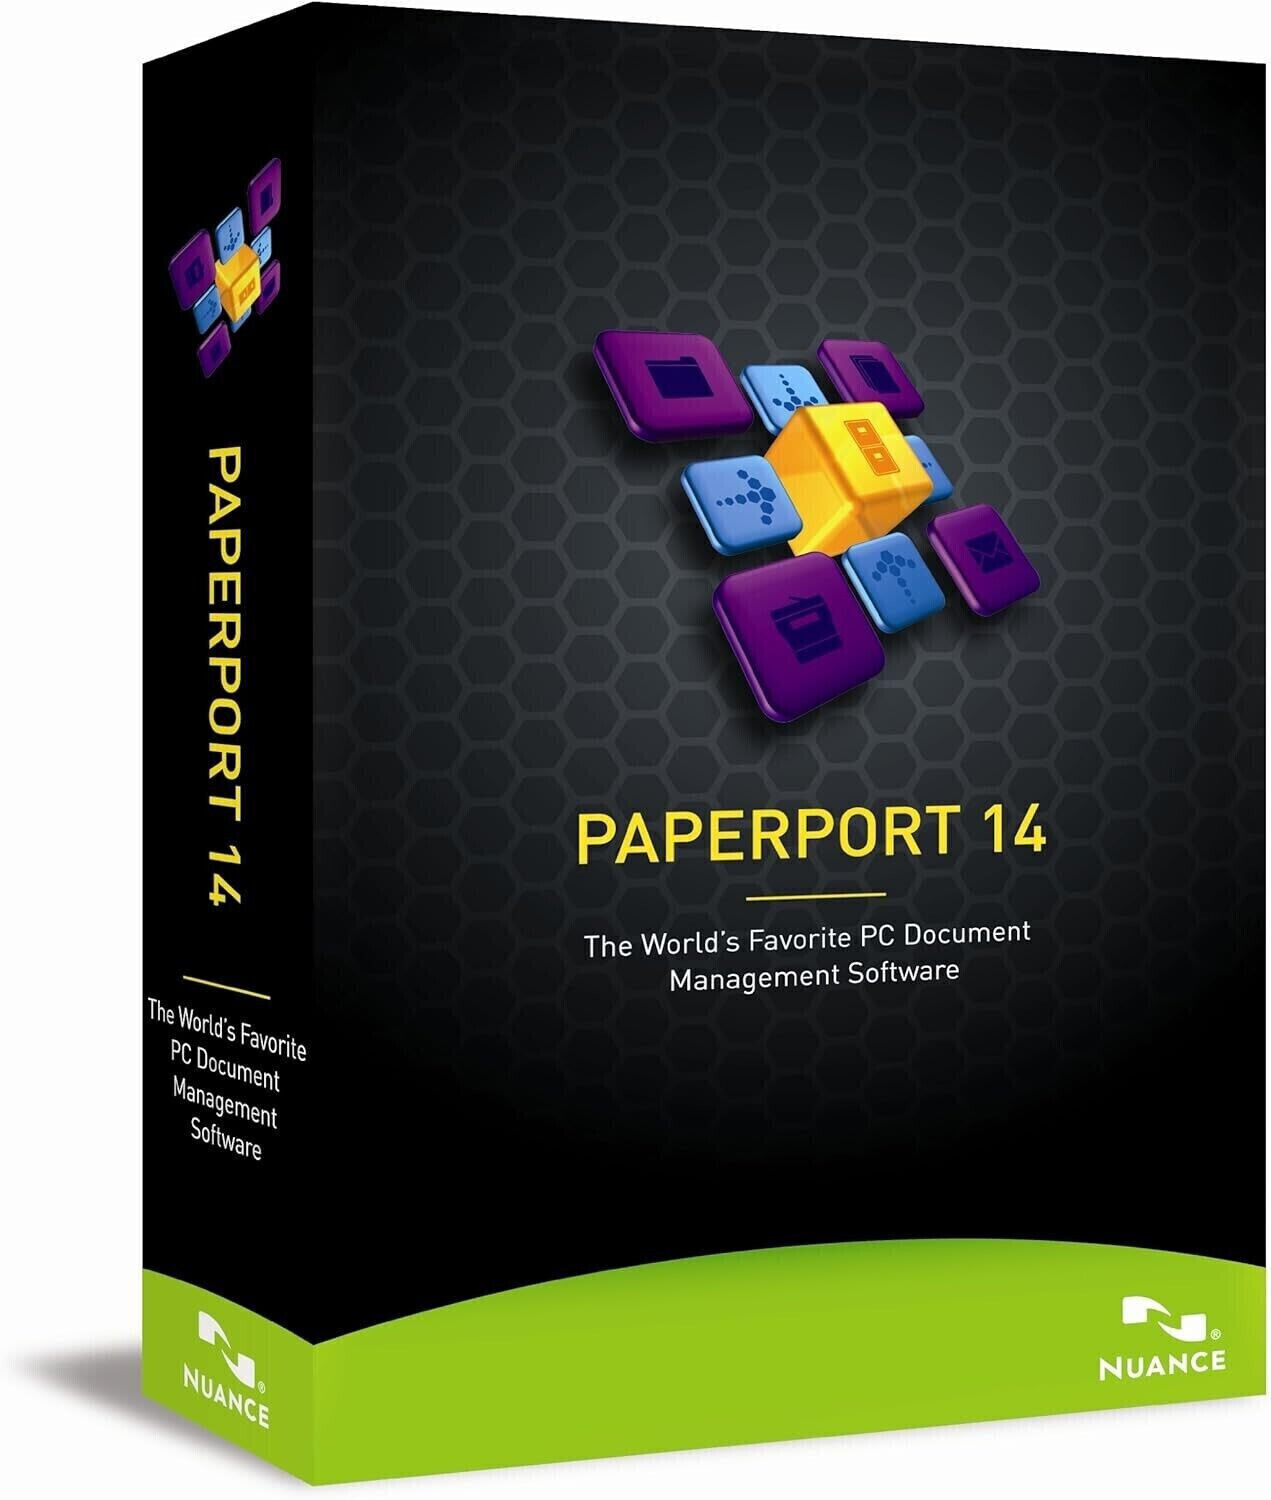 PaperPort 14 for Windows PC